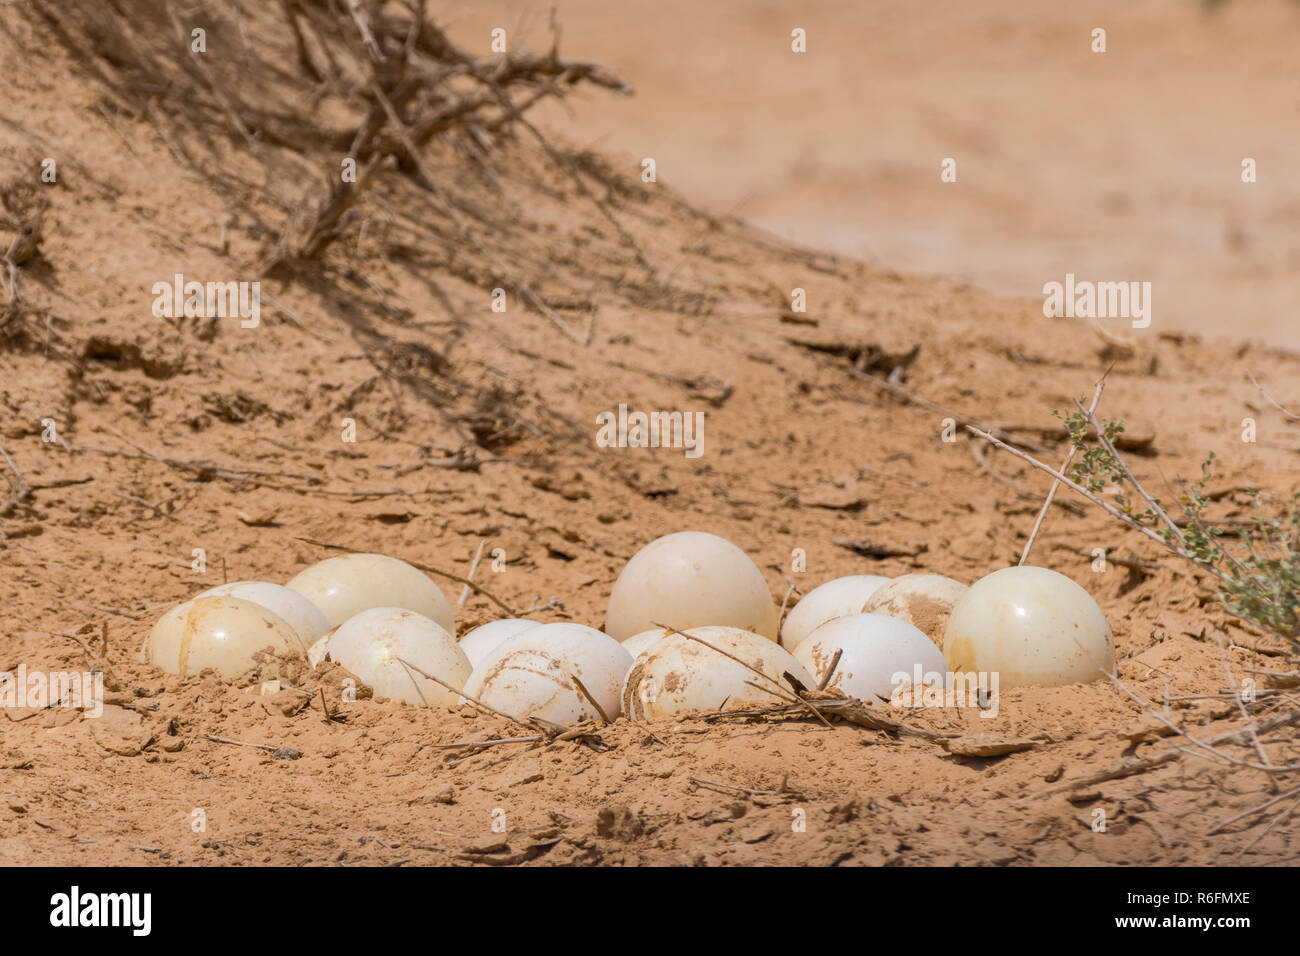 The North African Ostrich Eggs In The Yotvata Hai-Bar Nature Reserve, Israel Stock Photo